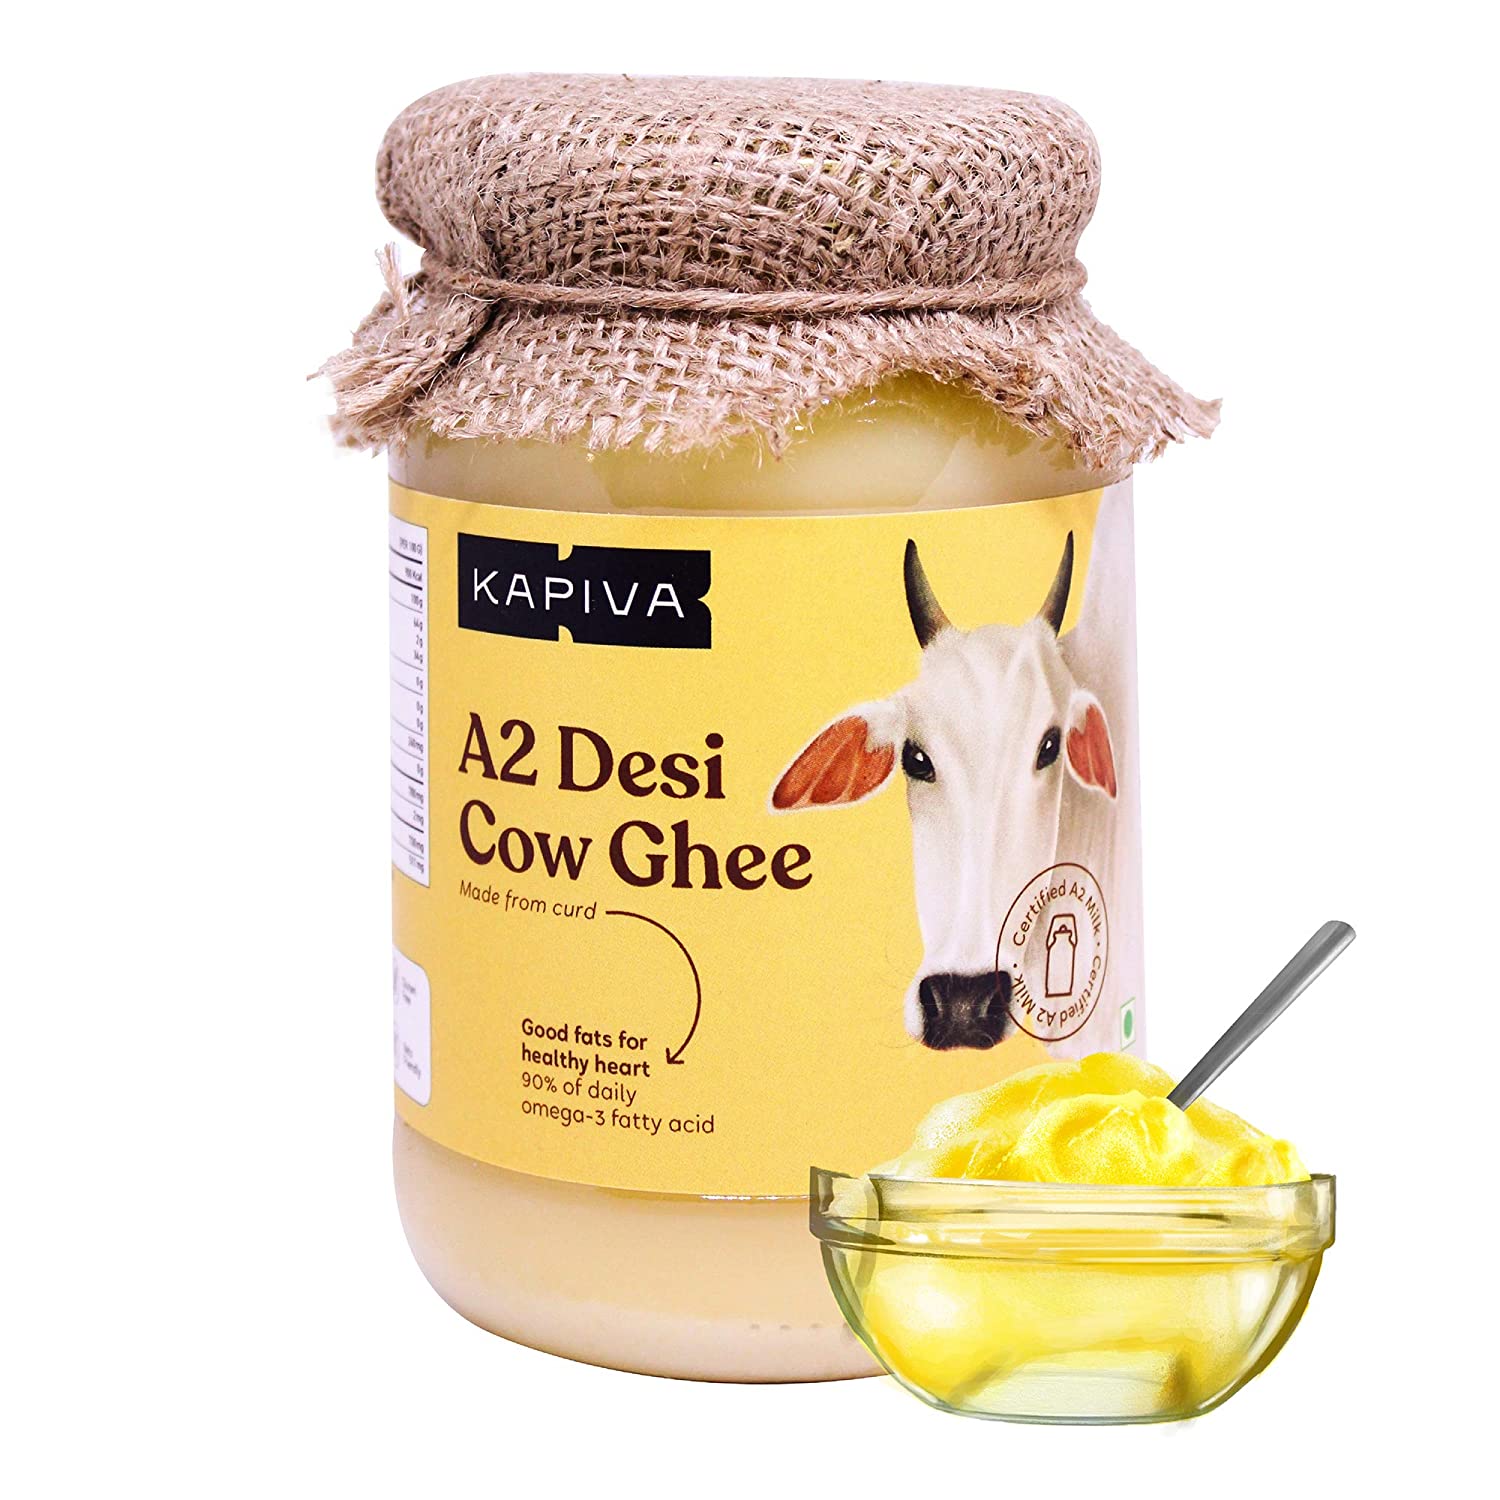 Kapiva A2 Desi Cow Ghee - Pure, Natural, & Healthy - Vedic Bilona Method - Helps Reduces Joint Pain and Improves Heart Functioning - 500ml